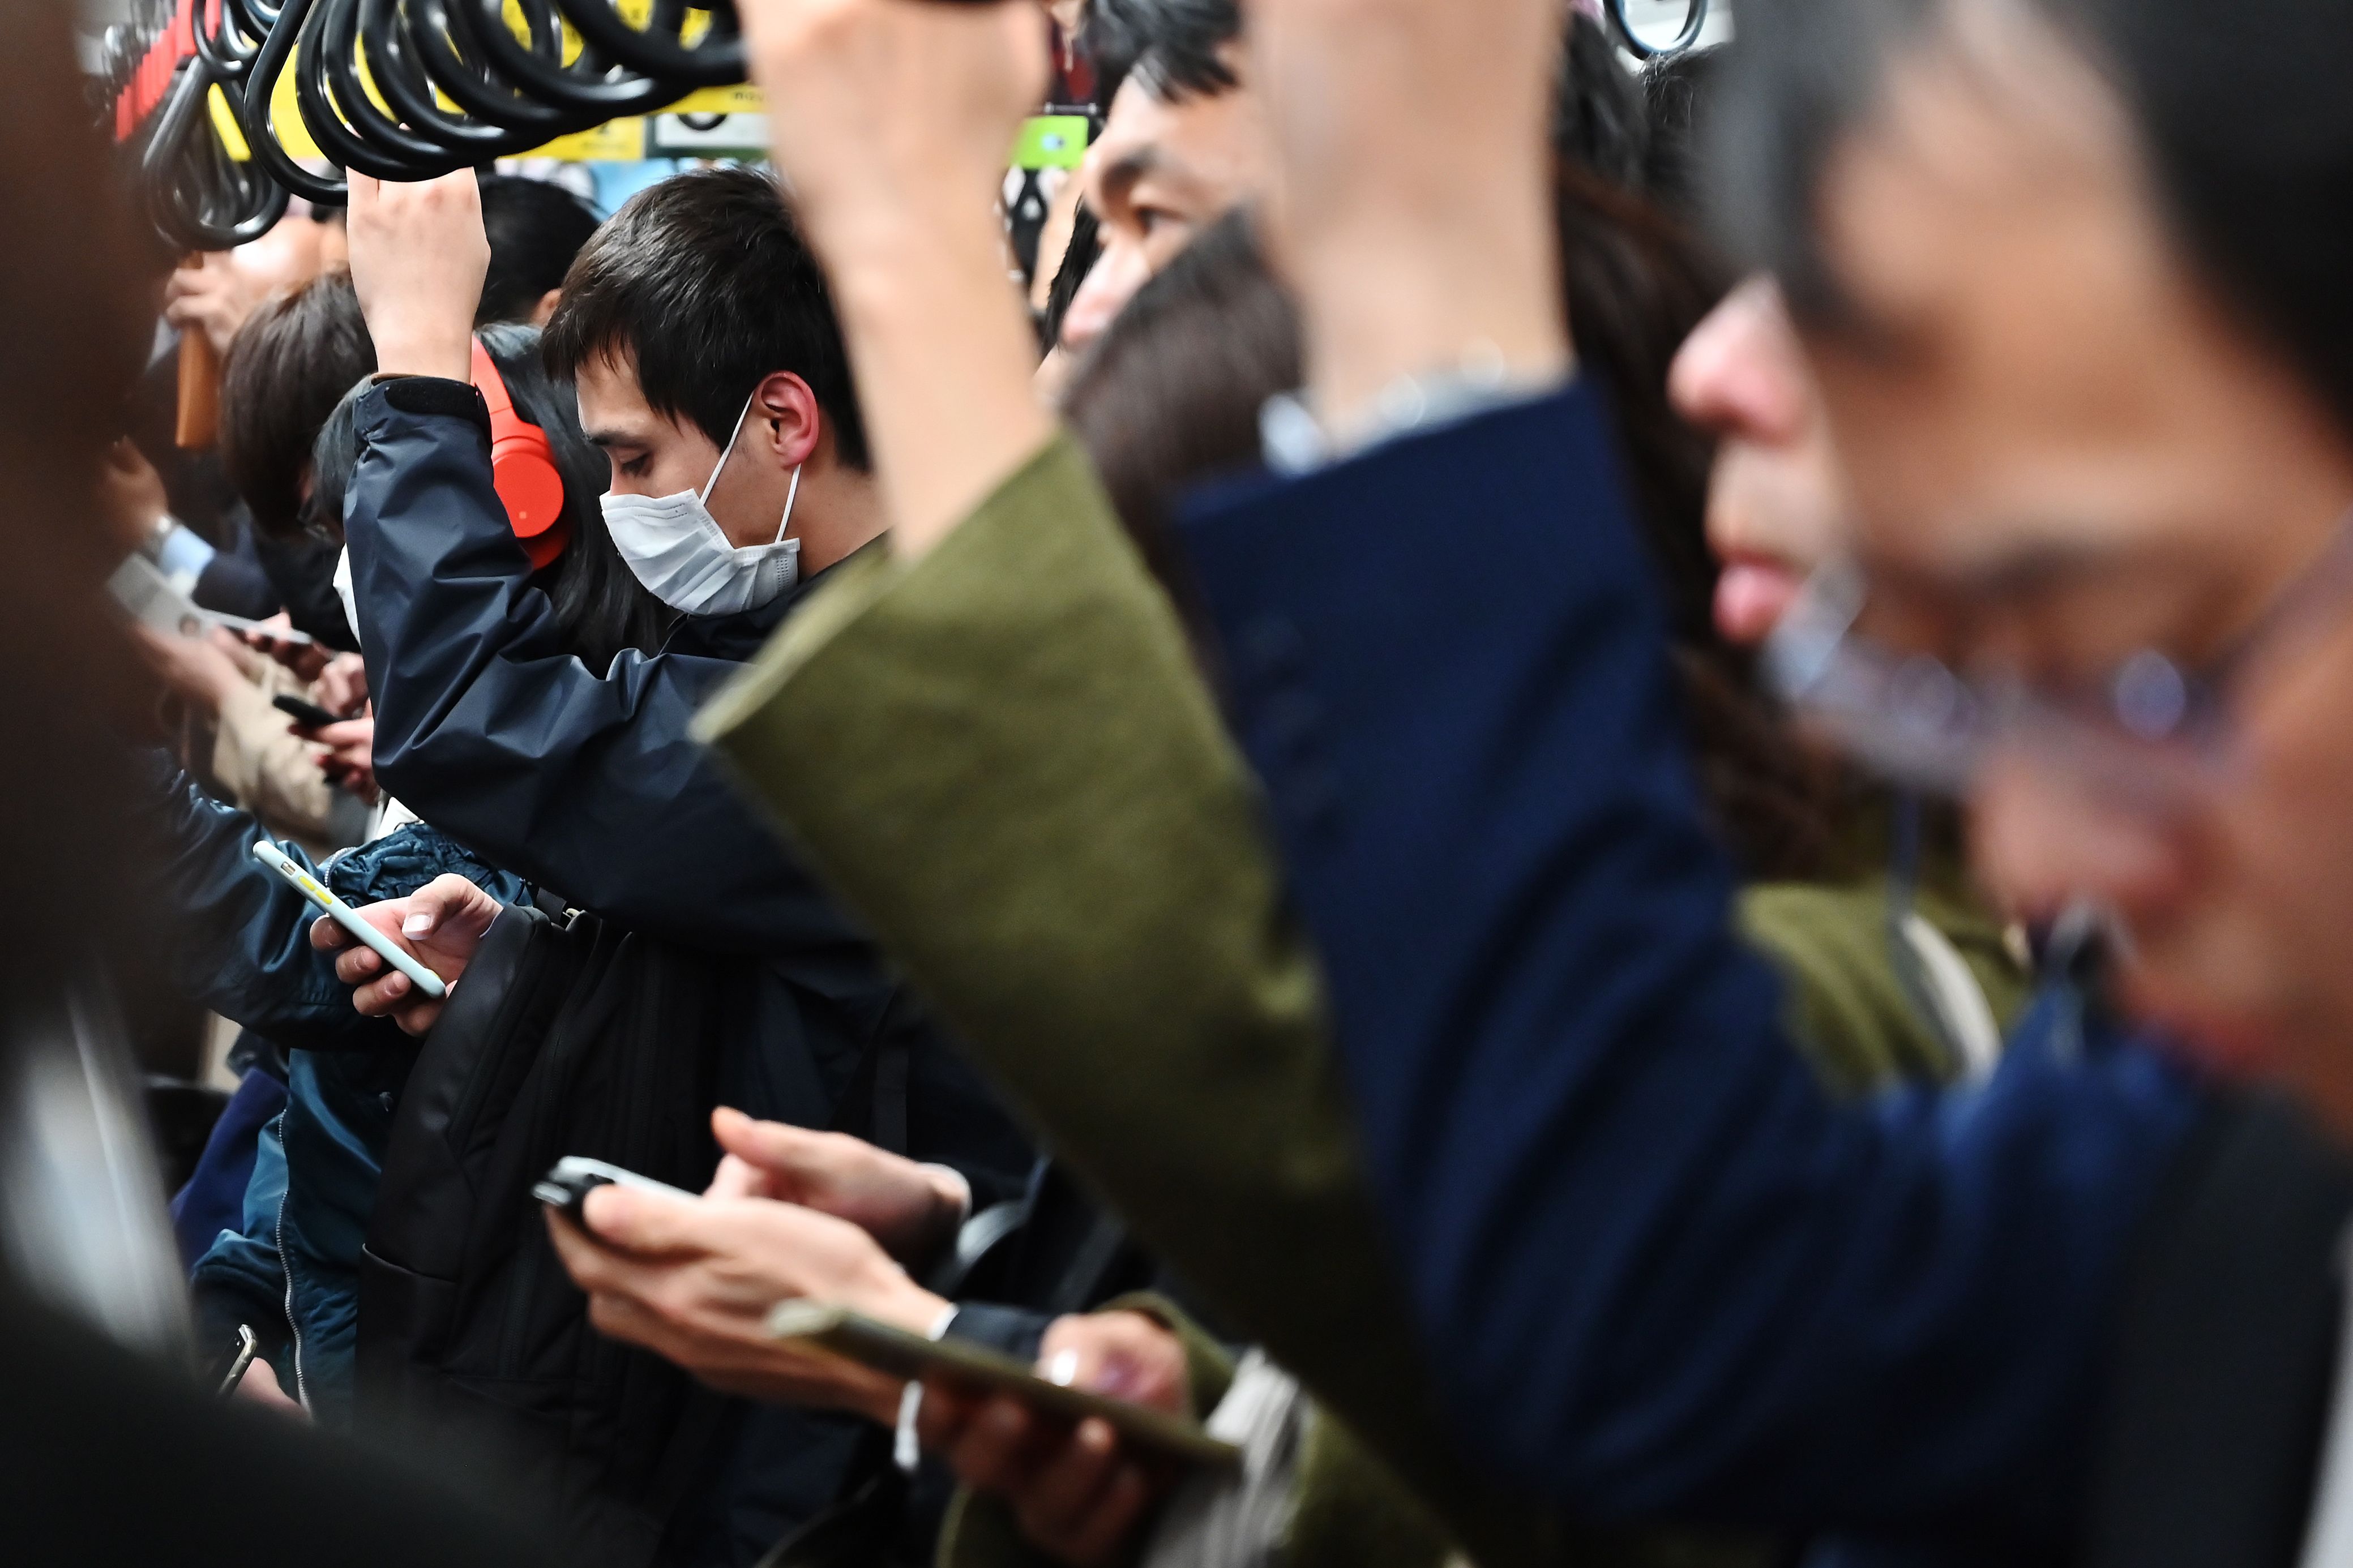 Commuters use their mobile phones while travelling on a coach of the Tokyo Metro network in Tokyo on March 26, 2019. (CHARLY TRIBALLEAU—AFP/Getty Images)